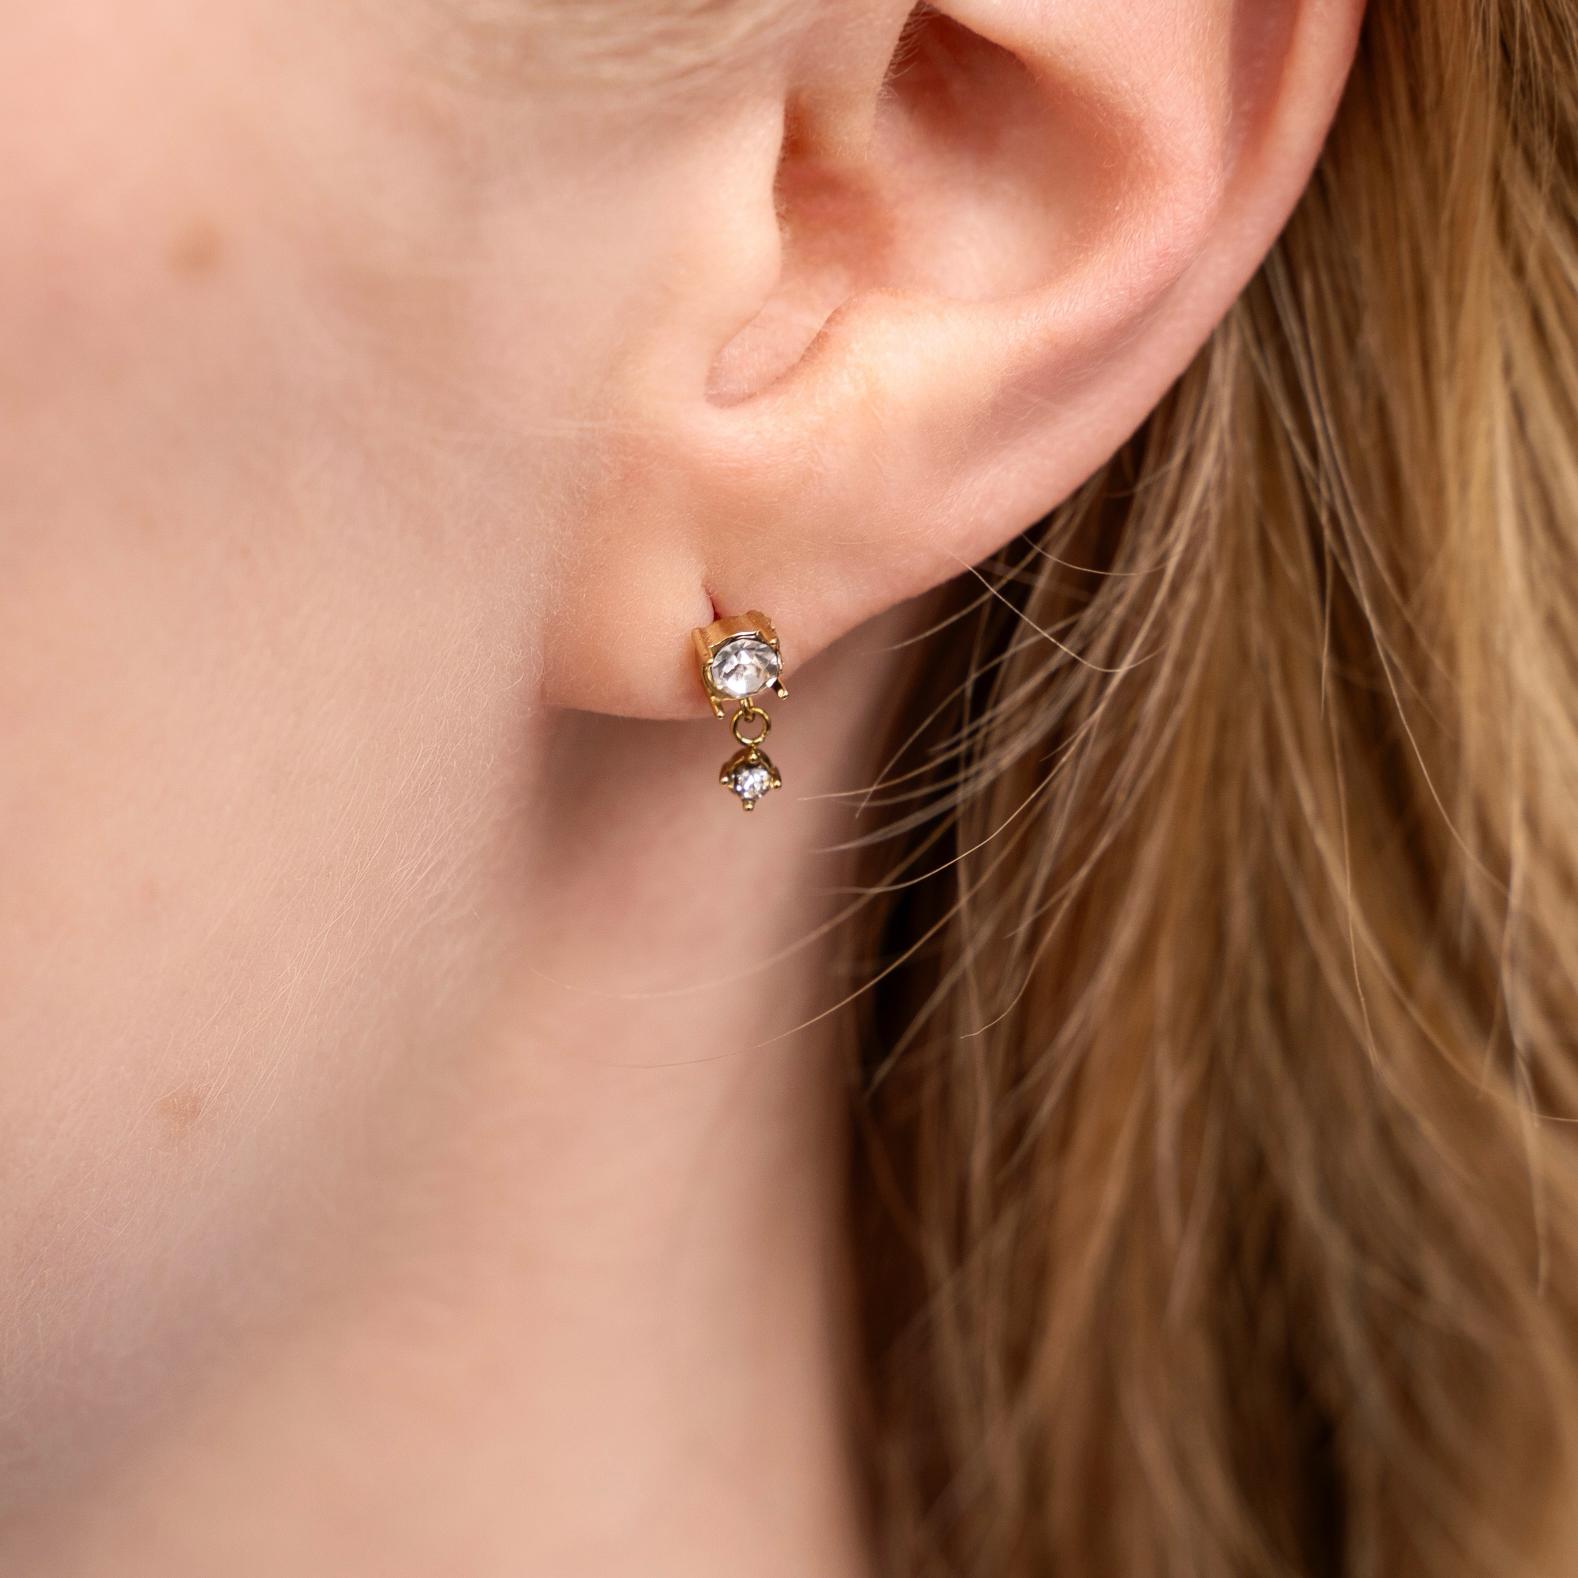 Stud earrings with charm stones